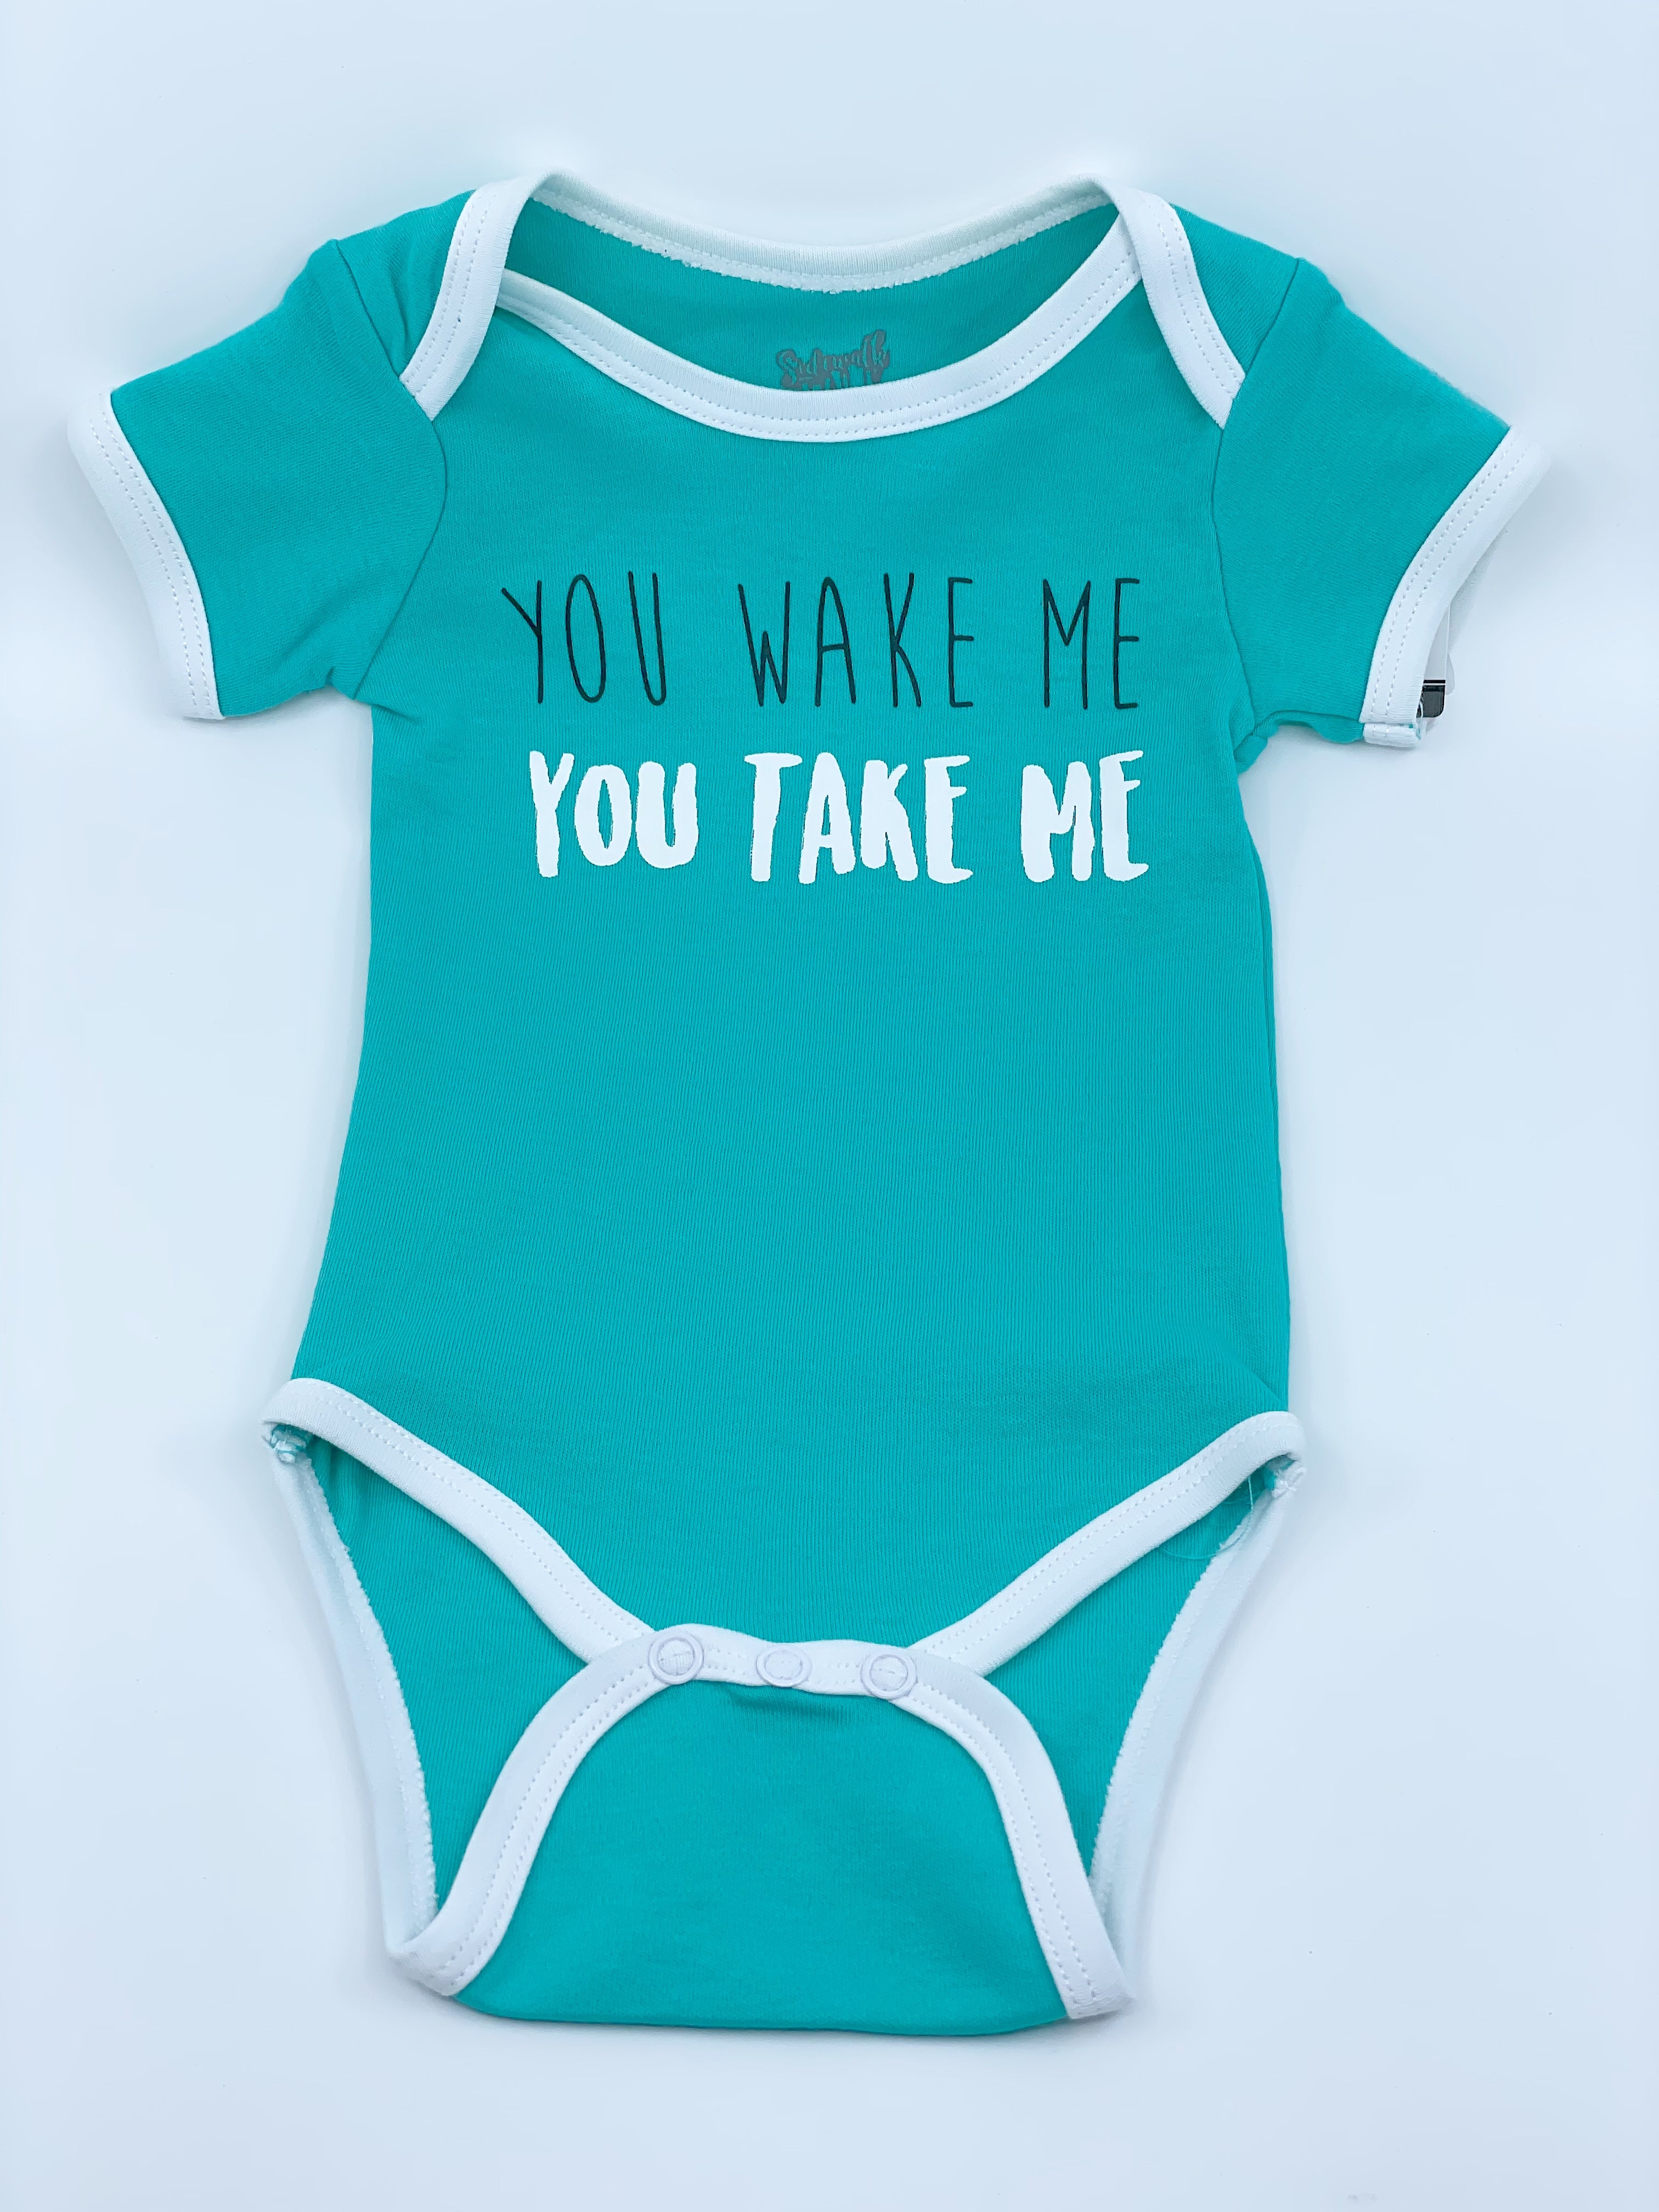 Baby Onesie - You Wake Me You Take Me! 6 - 12 Months